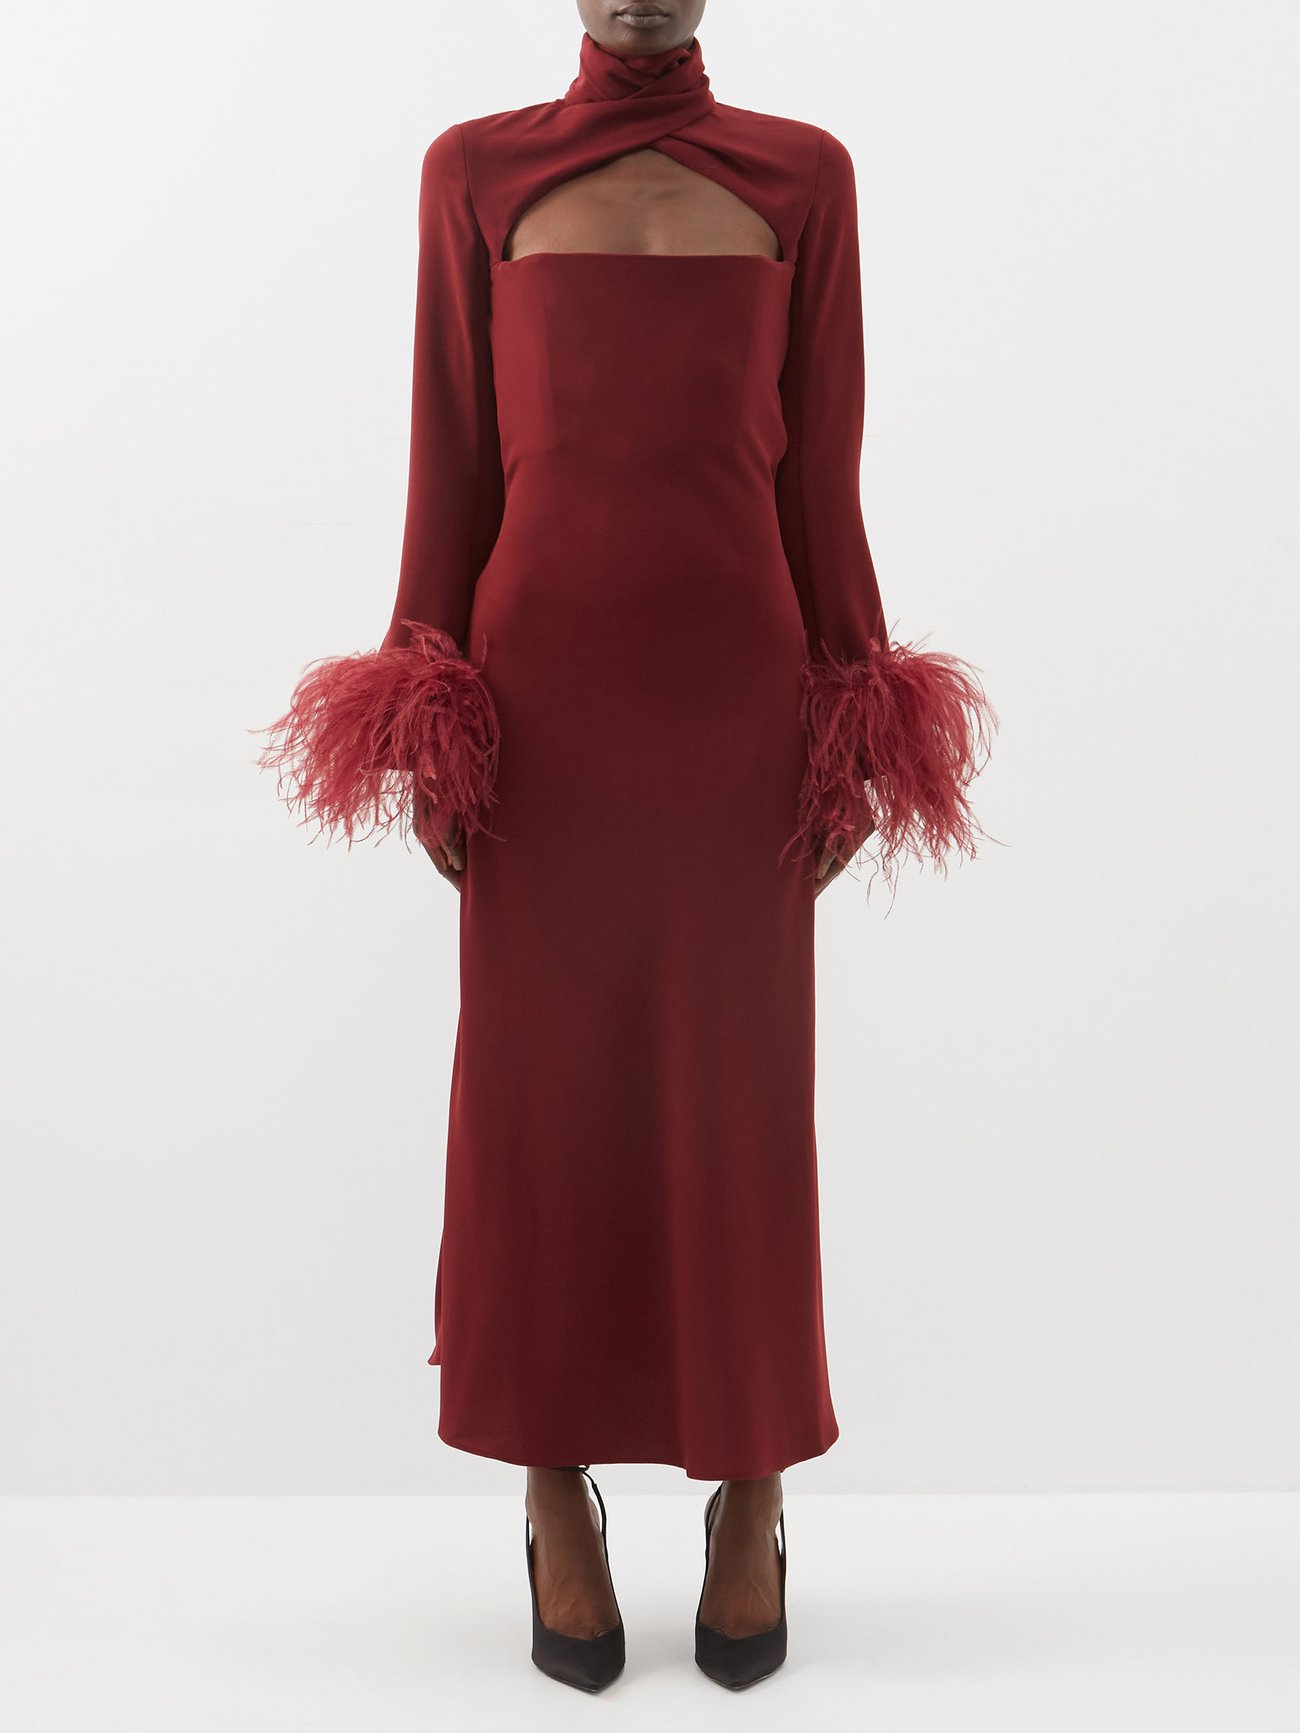 16 Arlington's glamorous feather-trimmed pieces make an instant impact as seen in this burgundy Odessa midi dress, shaped with a high wrapped neck and cutout décolleté.